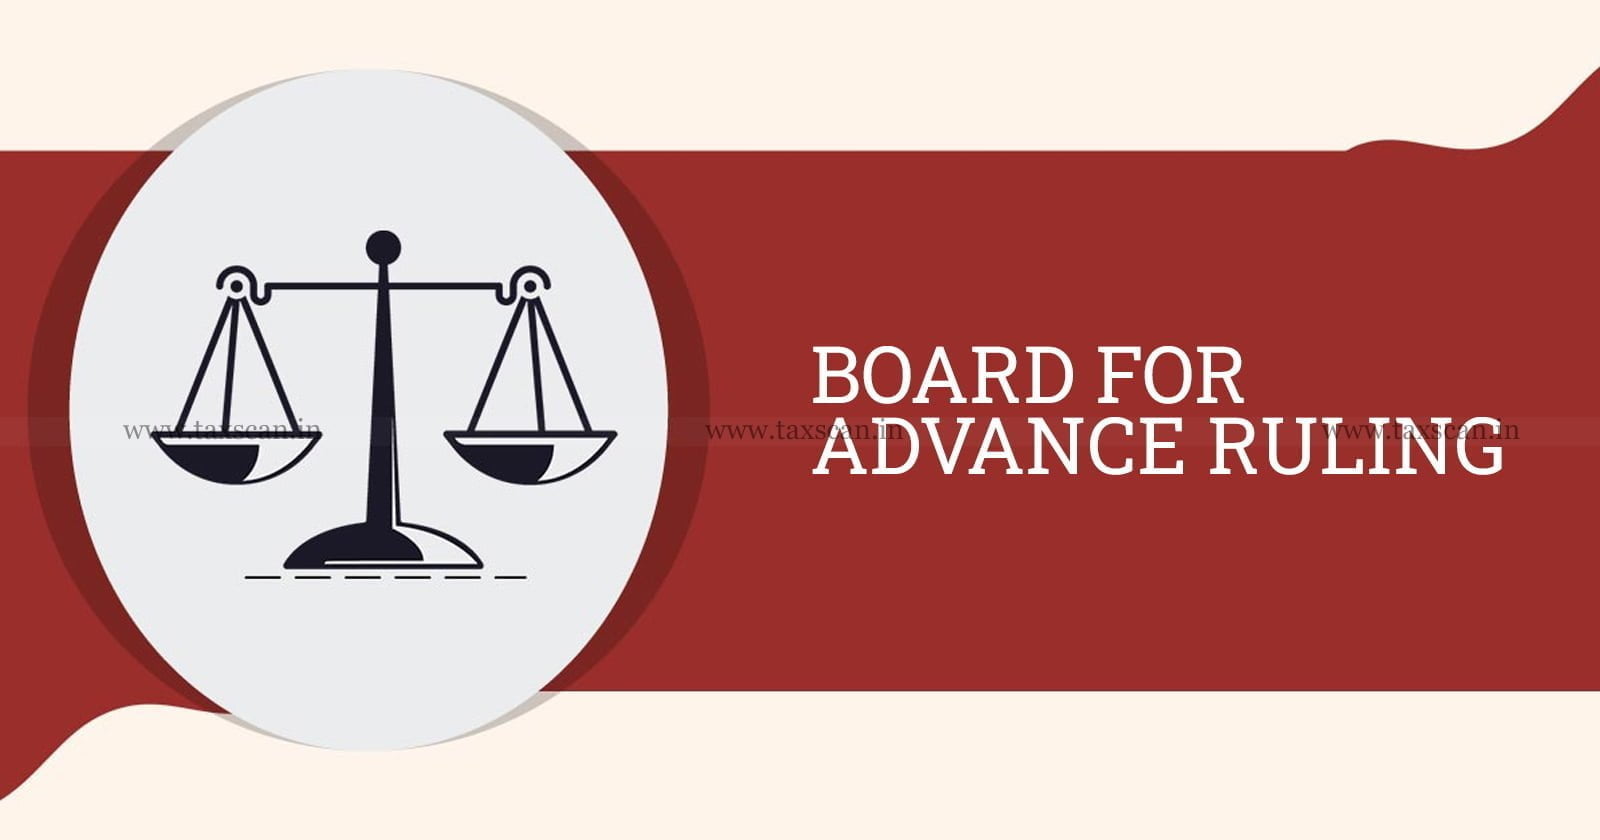 CBDT - Board for Advance Ruling - BAR - Direct Taxes - Establishment of Board for Advance Ruling - taxscan